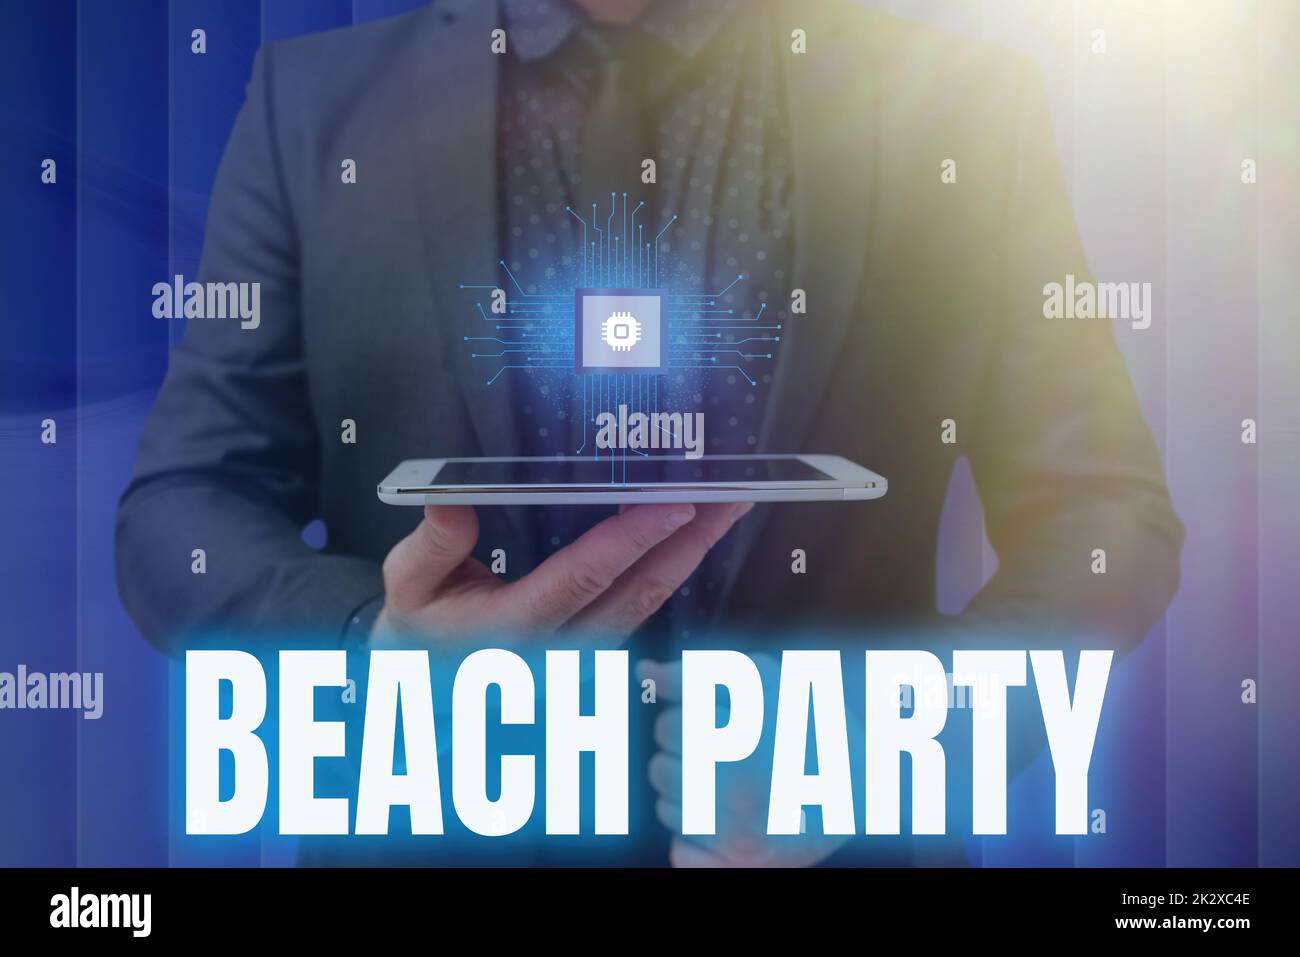 Sign displaying Beach Party. Business concept small or big festival held on sea shores usually wearing bikini Man holding Screen Of Mobile Phone Showing The Futuristic Technology. Stock Photo